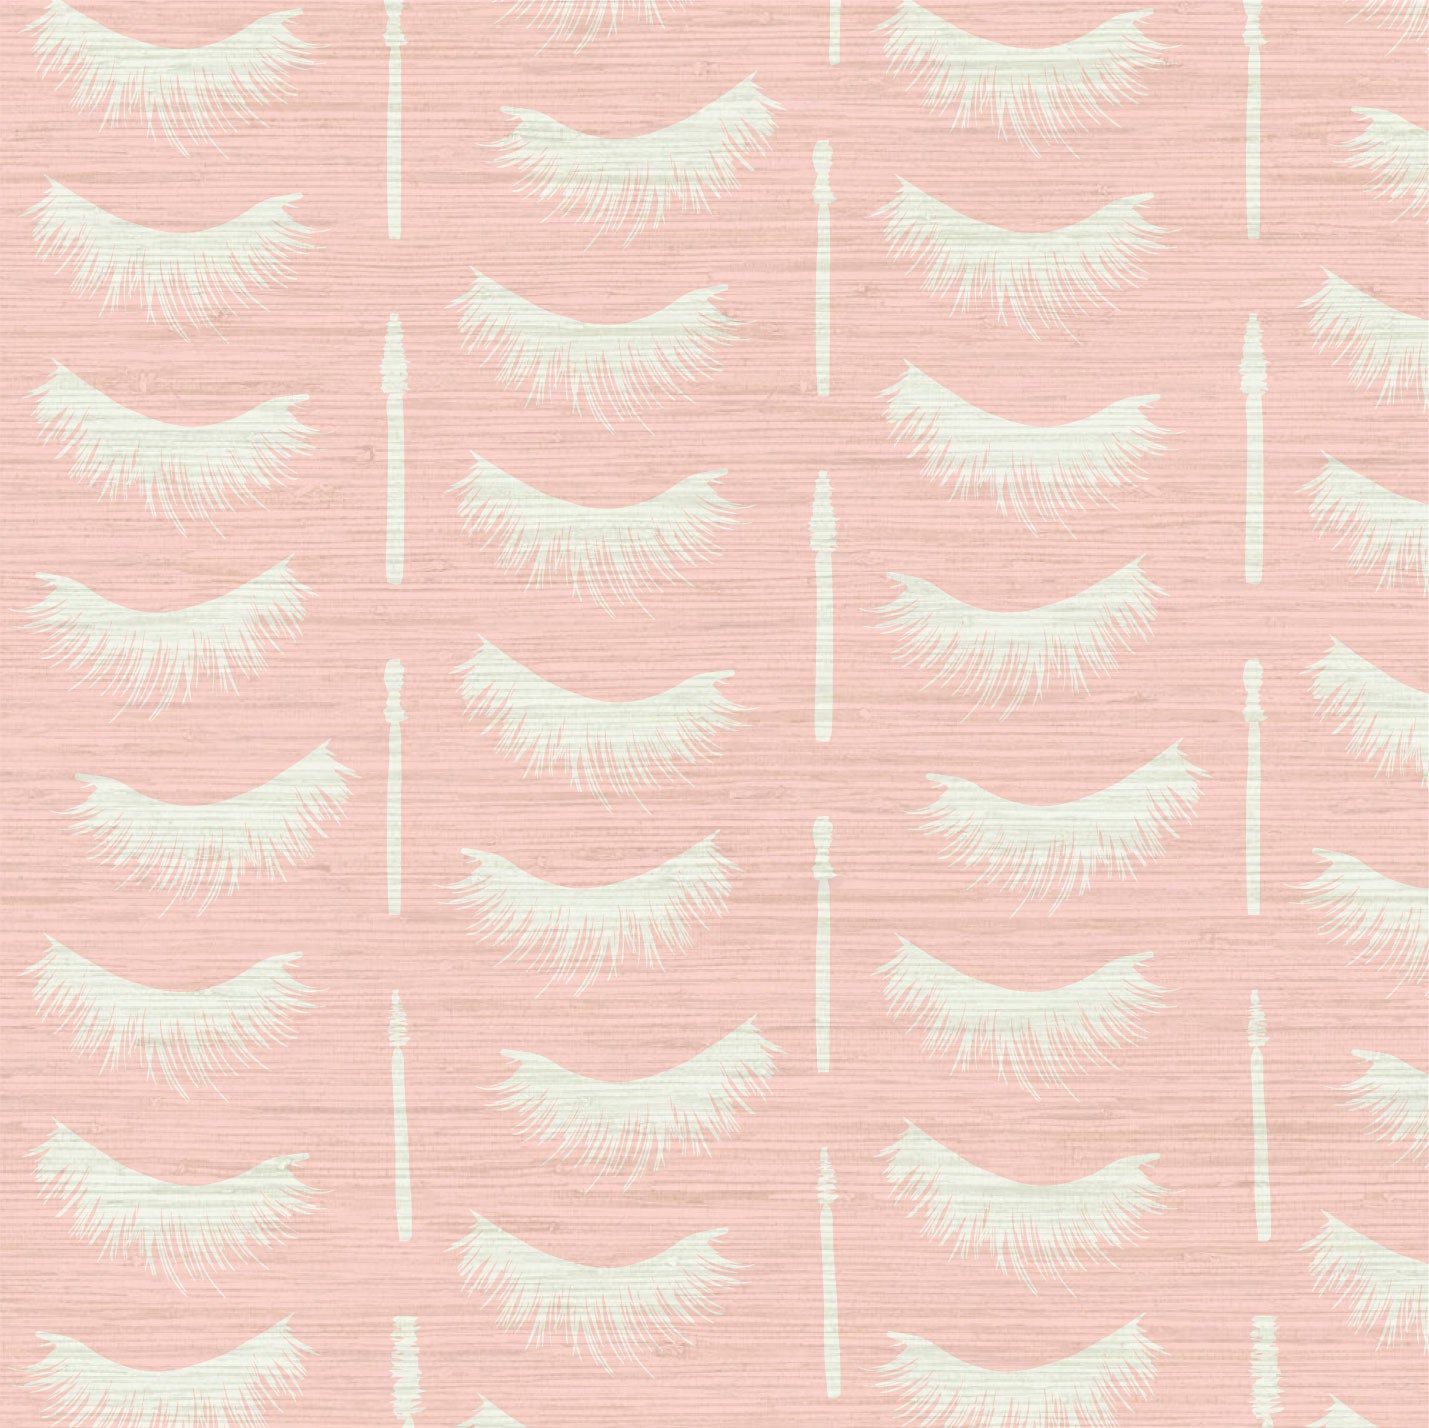 light pink printed grasscloth  with eyelashes arranged in vertical stripes separated by mascara wands in off-white